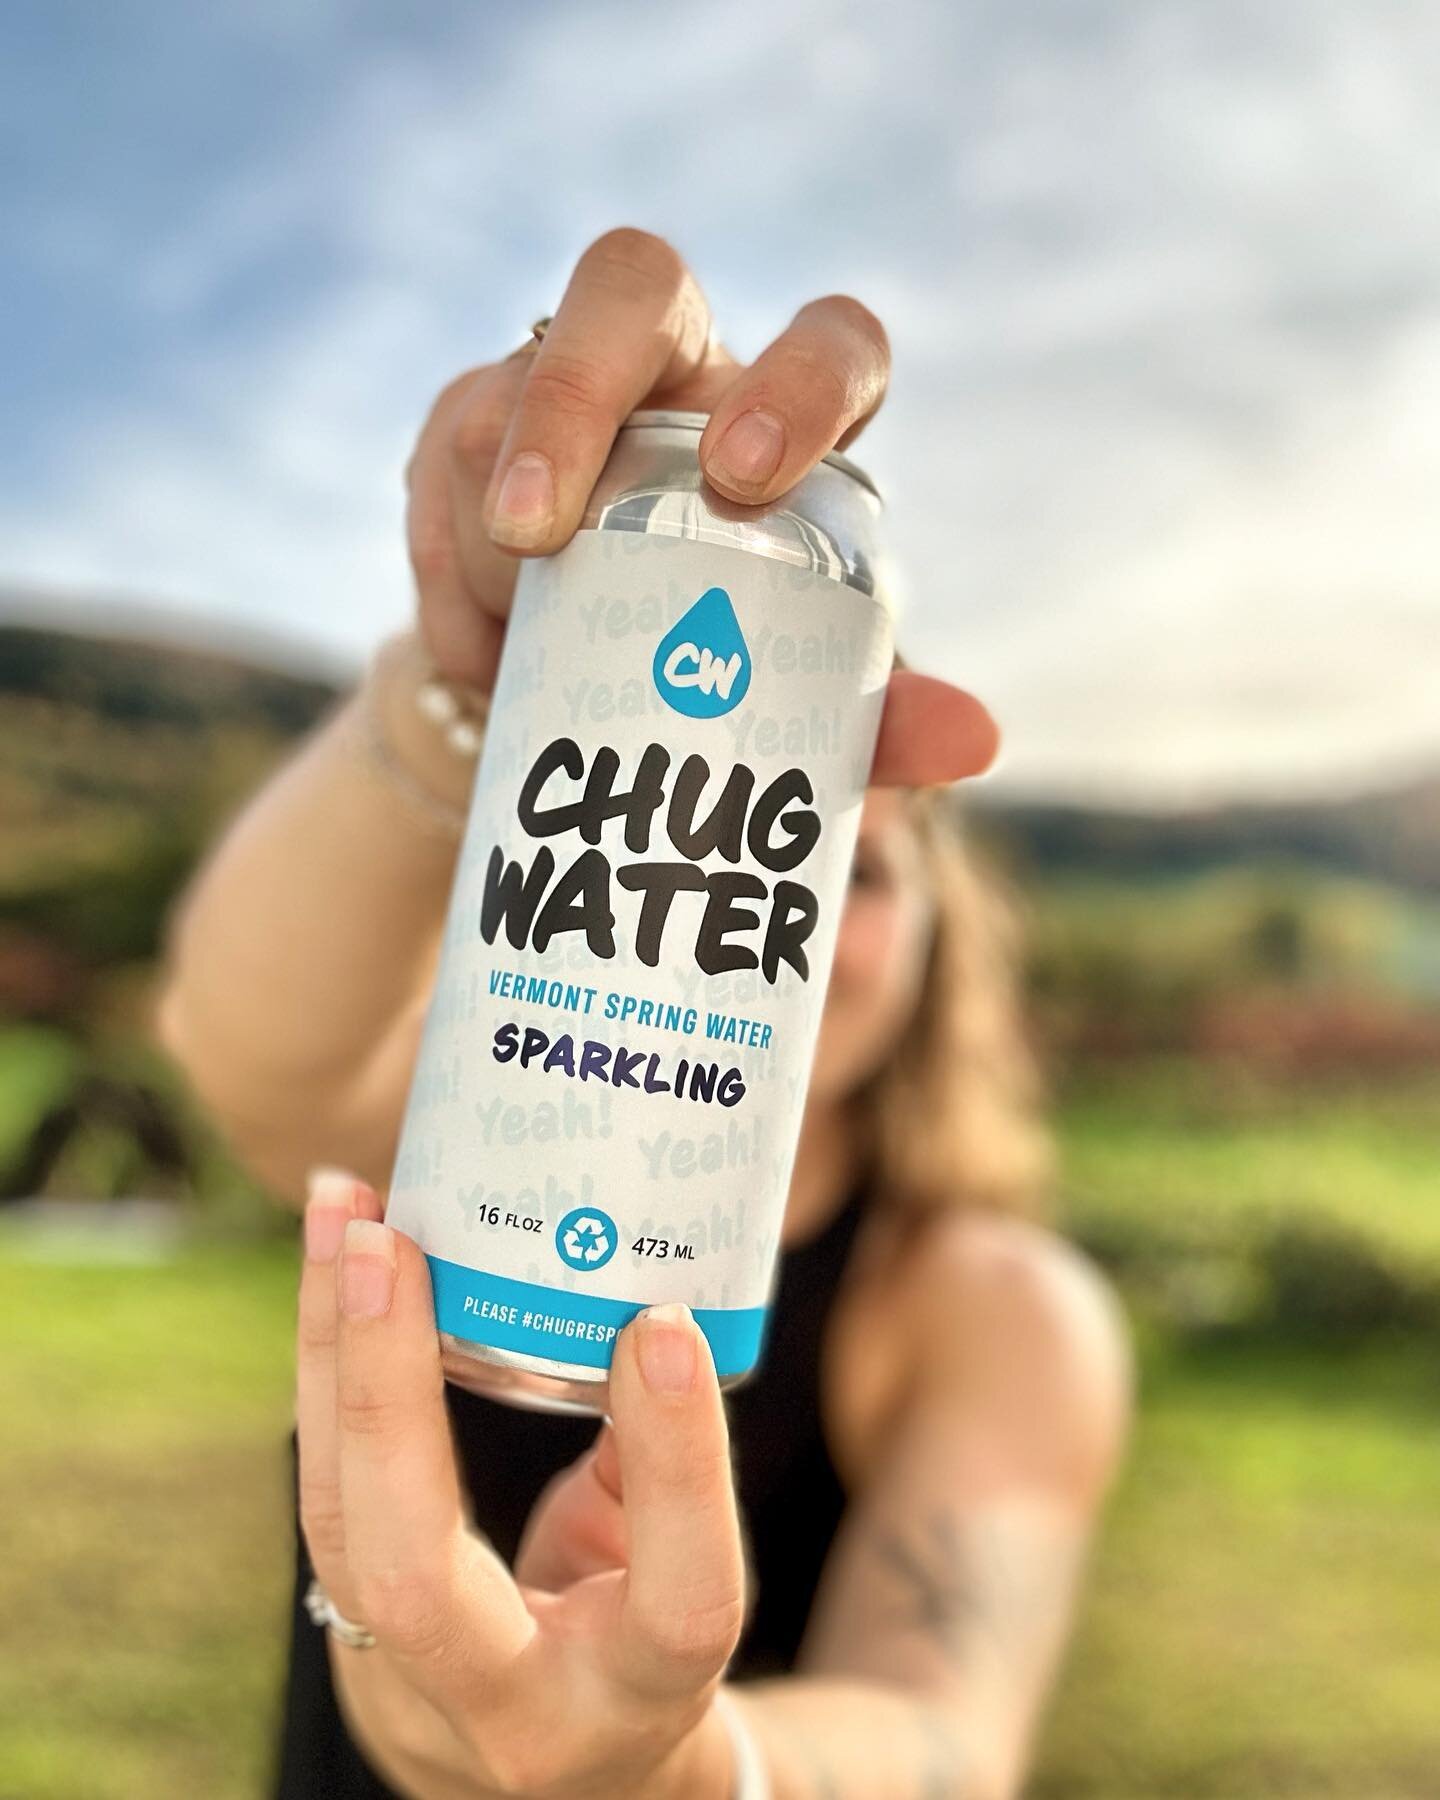 YEAH! YEAH! YEAH!

Sparkling Chug Water is now available for distribution in Vermont!

Have you tried it yet? 🫧 

#chugwater #sparkling #springwater #vermont #chugresponsibly